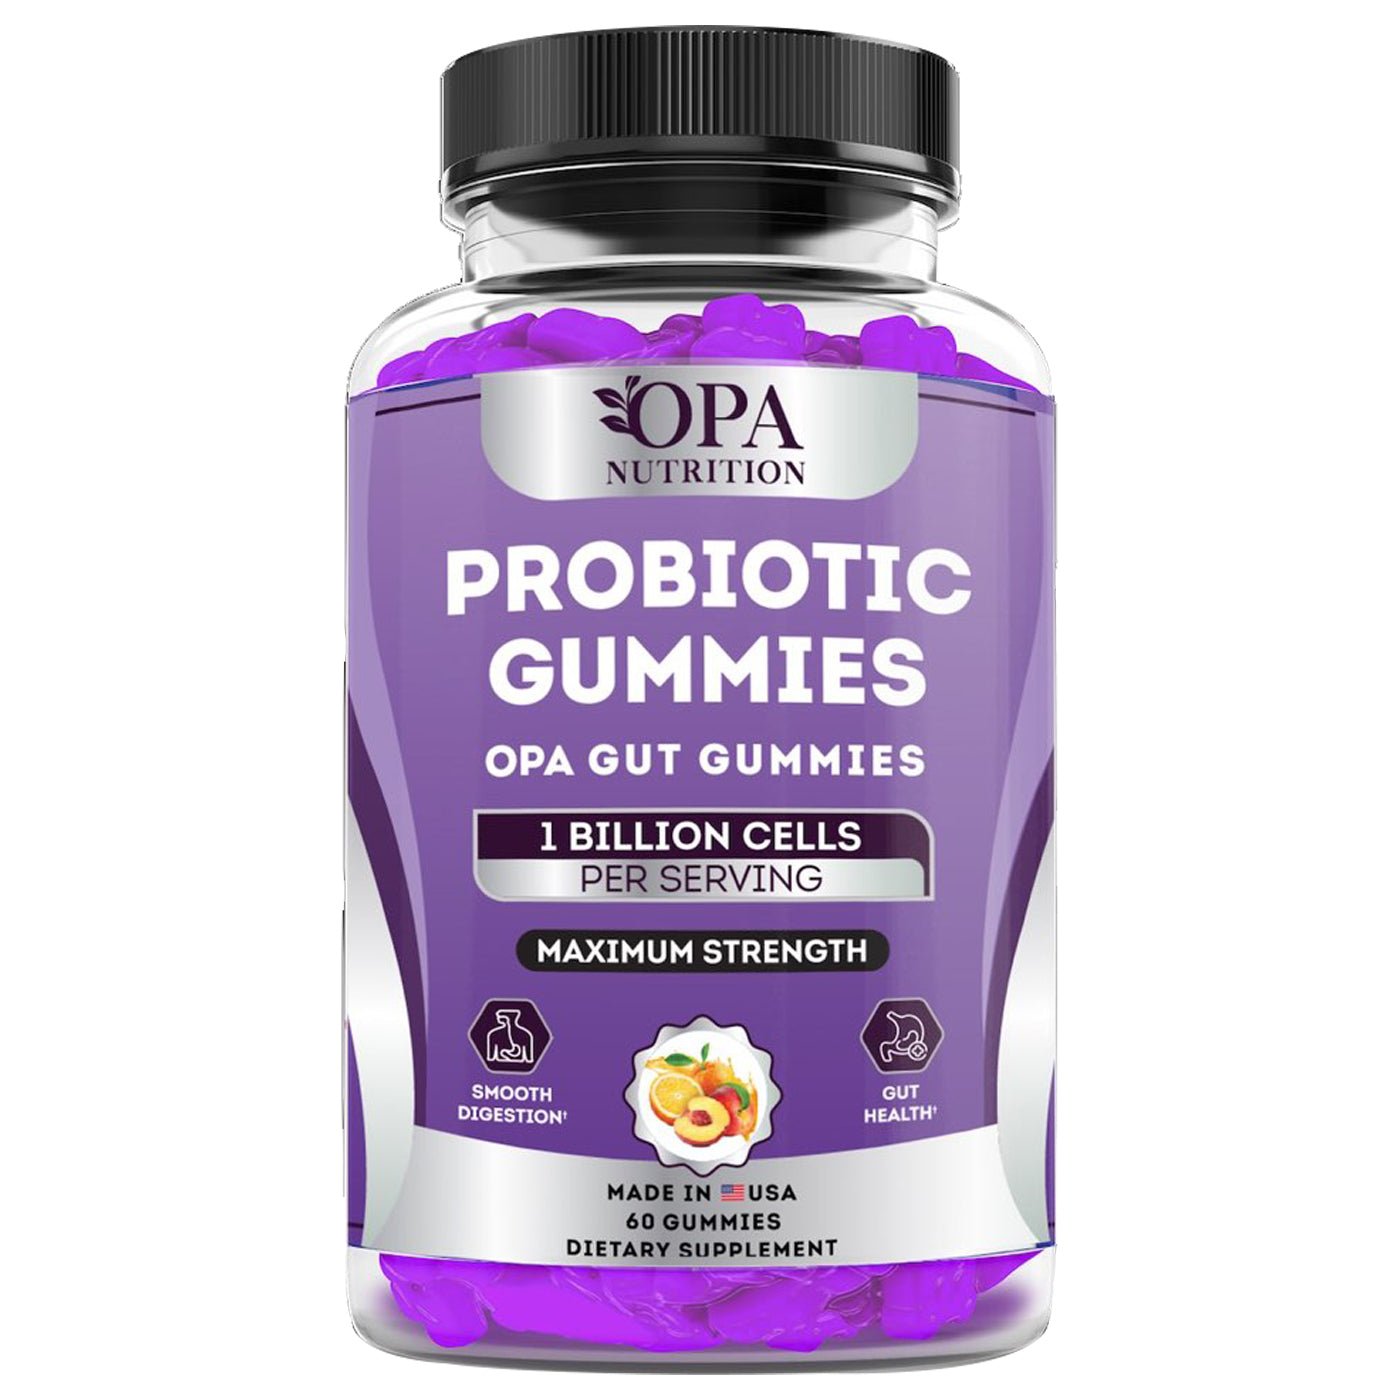 Probiotic Gummies for Smooth Digestion Gas Constipation Relief - 60 Ct.jpg